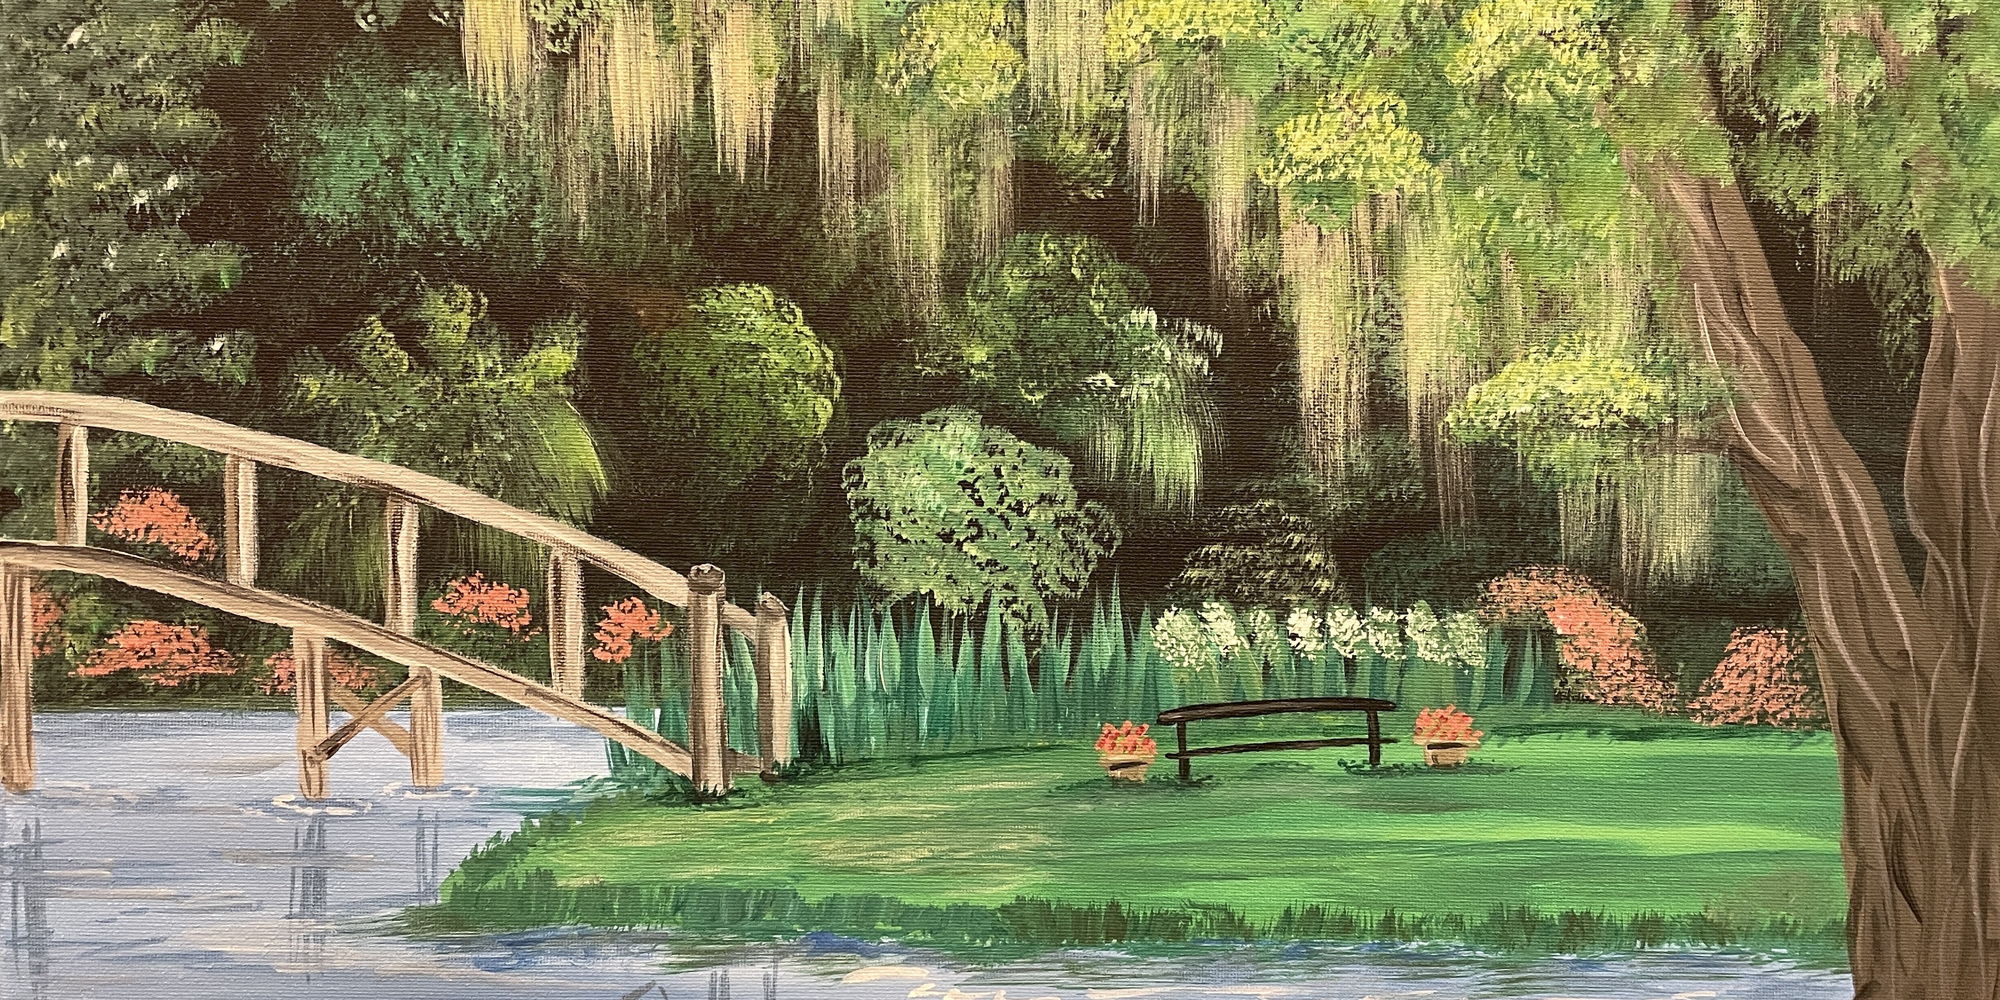 (New Time!) Paint & Sip Event @ The Inn at Middleton Place: Middleton Gardens ($47pp) promotional image